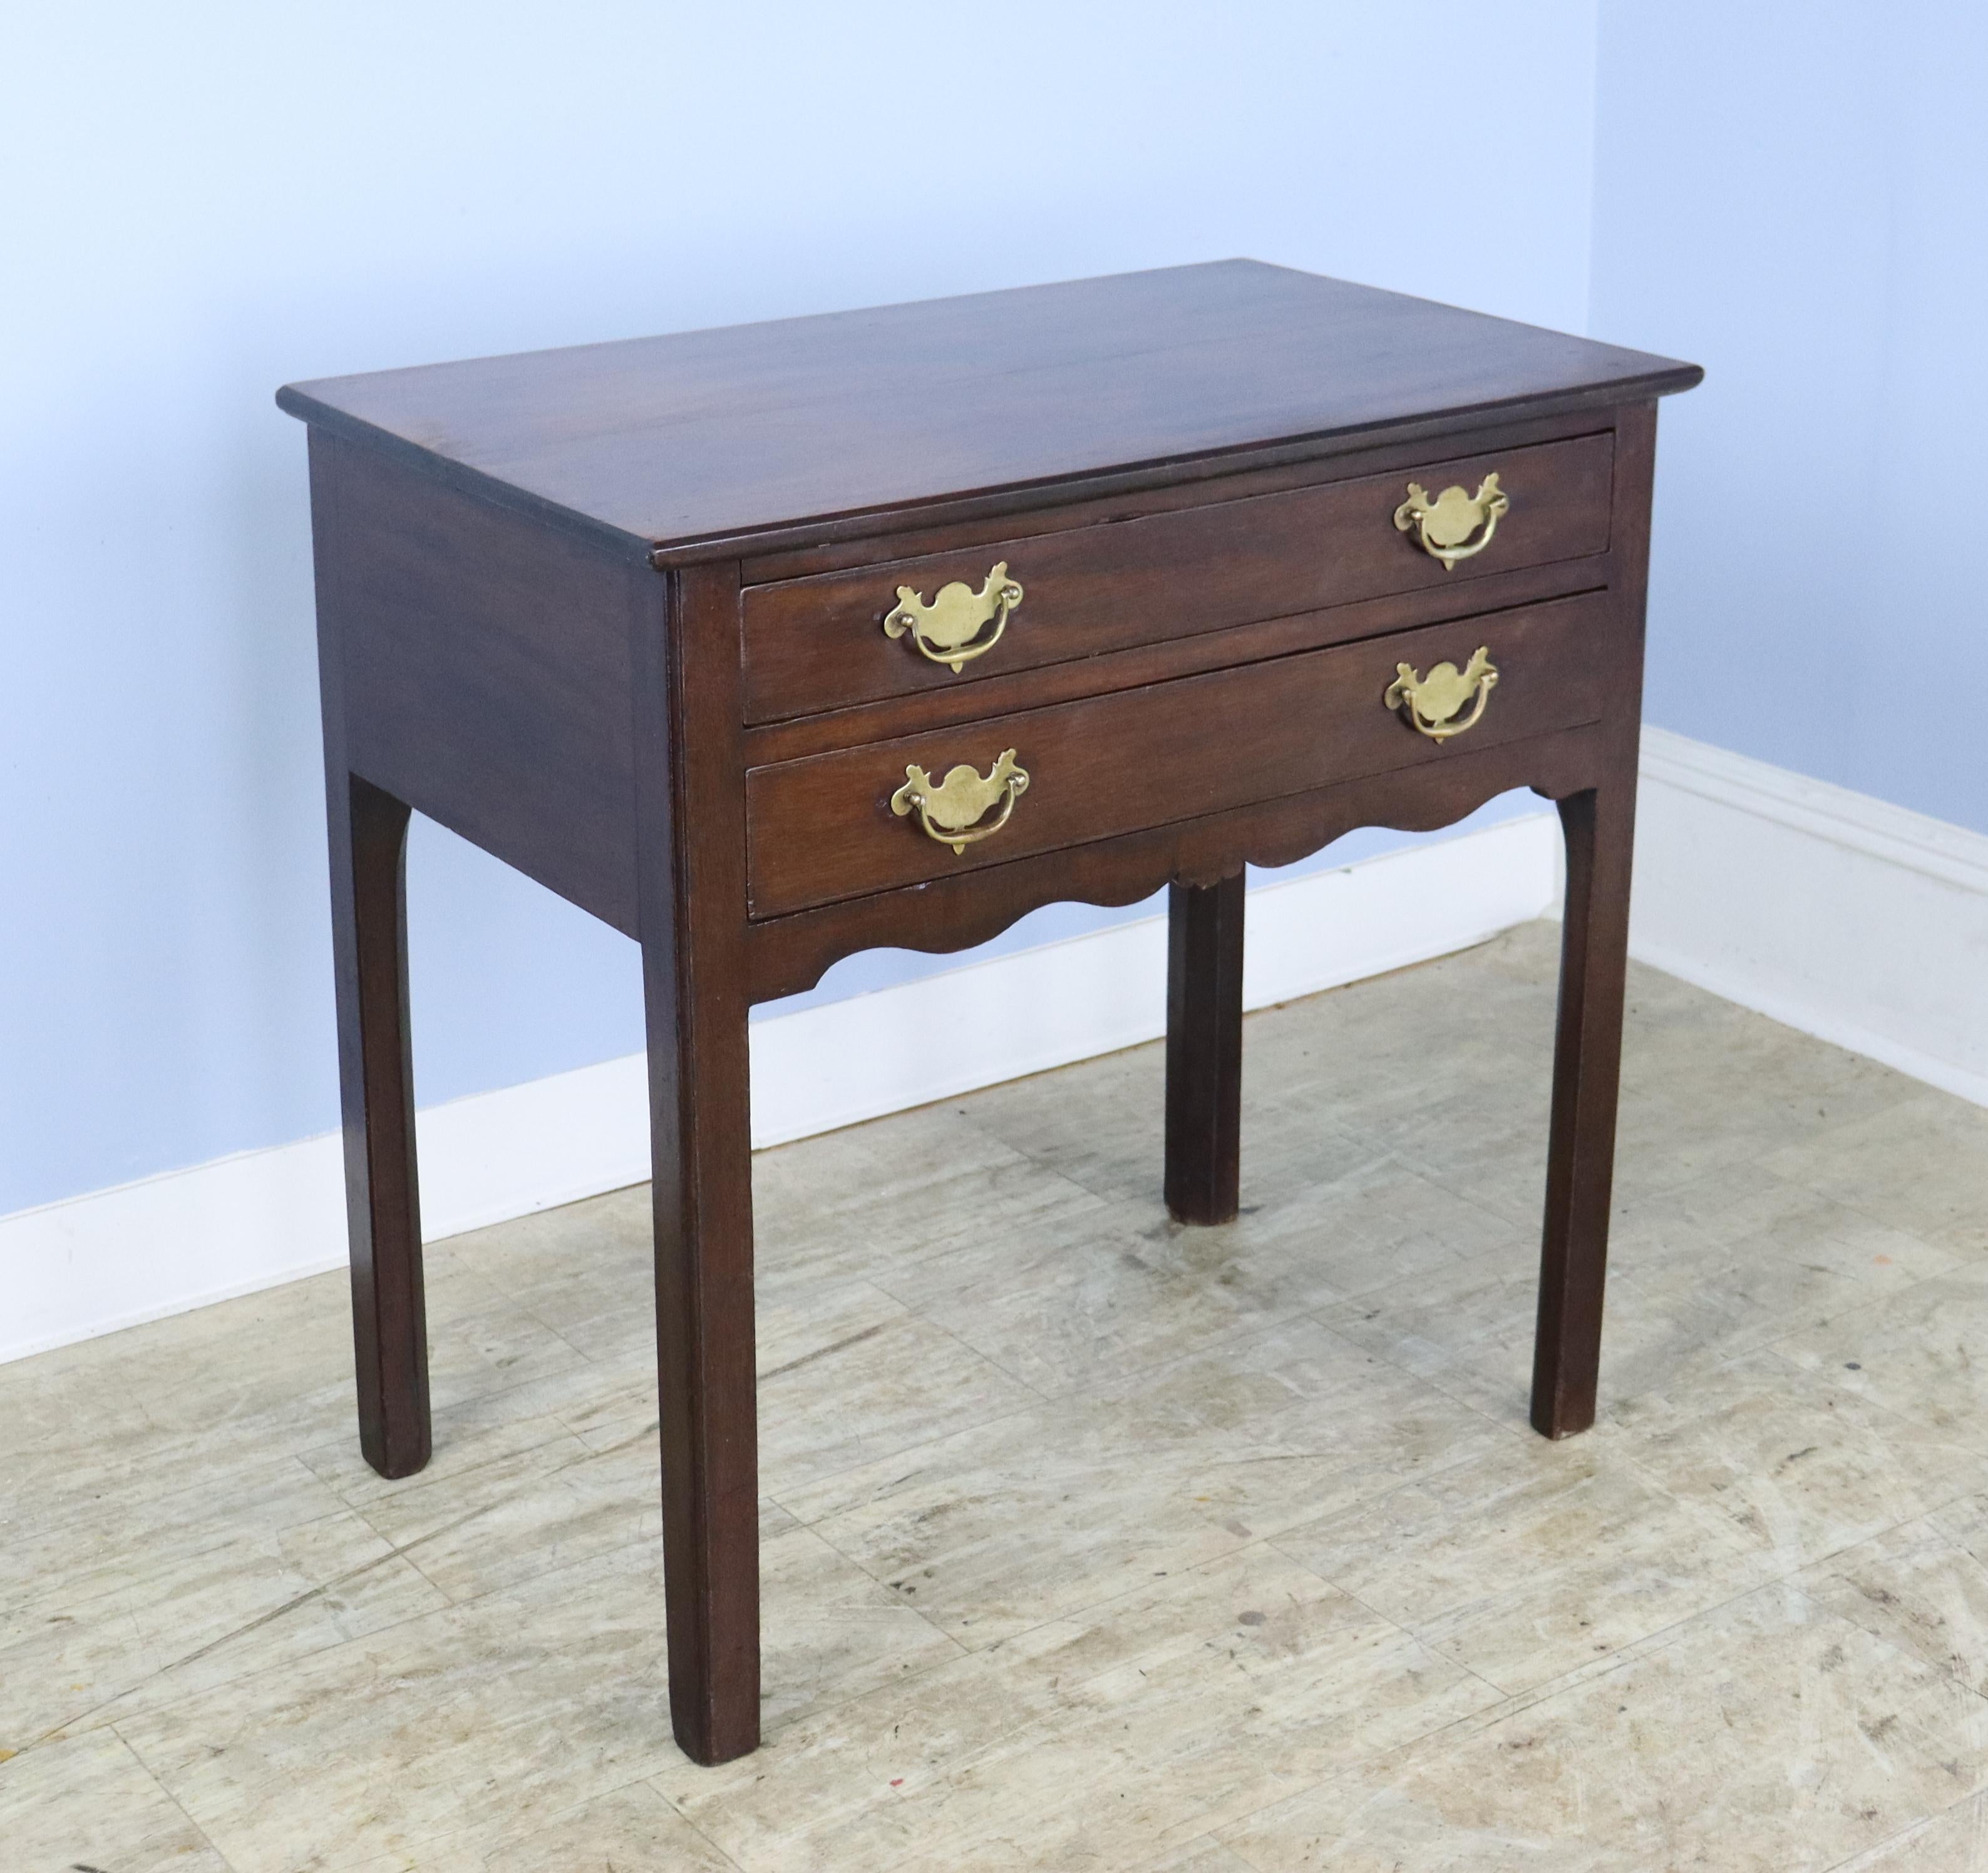 A handsome two drawer Georgian side table, quite sturdy and the top is in very nice condition for its age.  The mahogany is well grained with little to no distress.  Solid straight legs are typical of the period.  The brasses appear to be original.